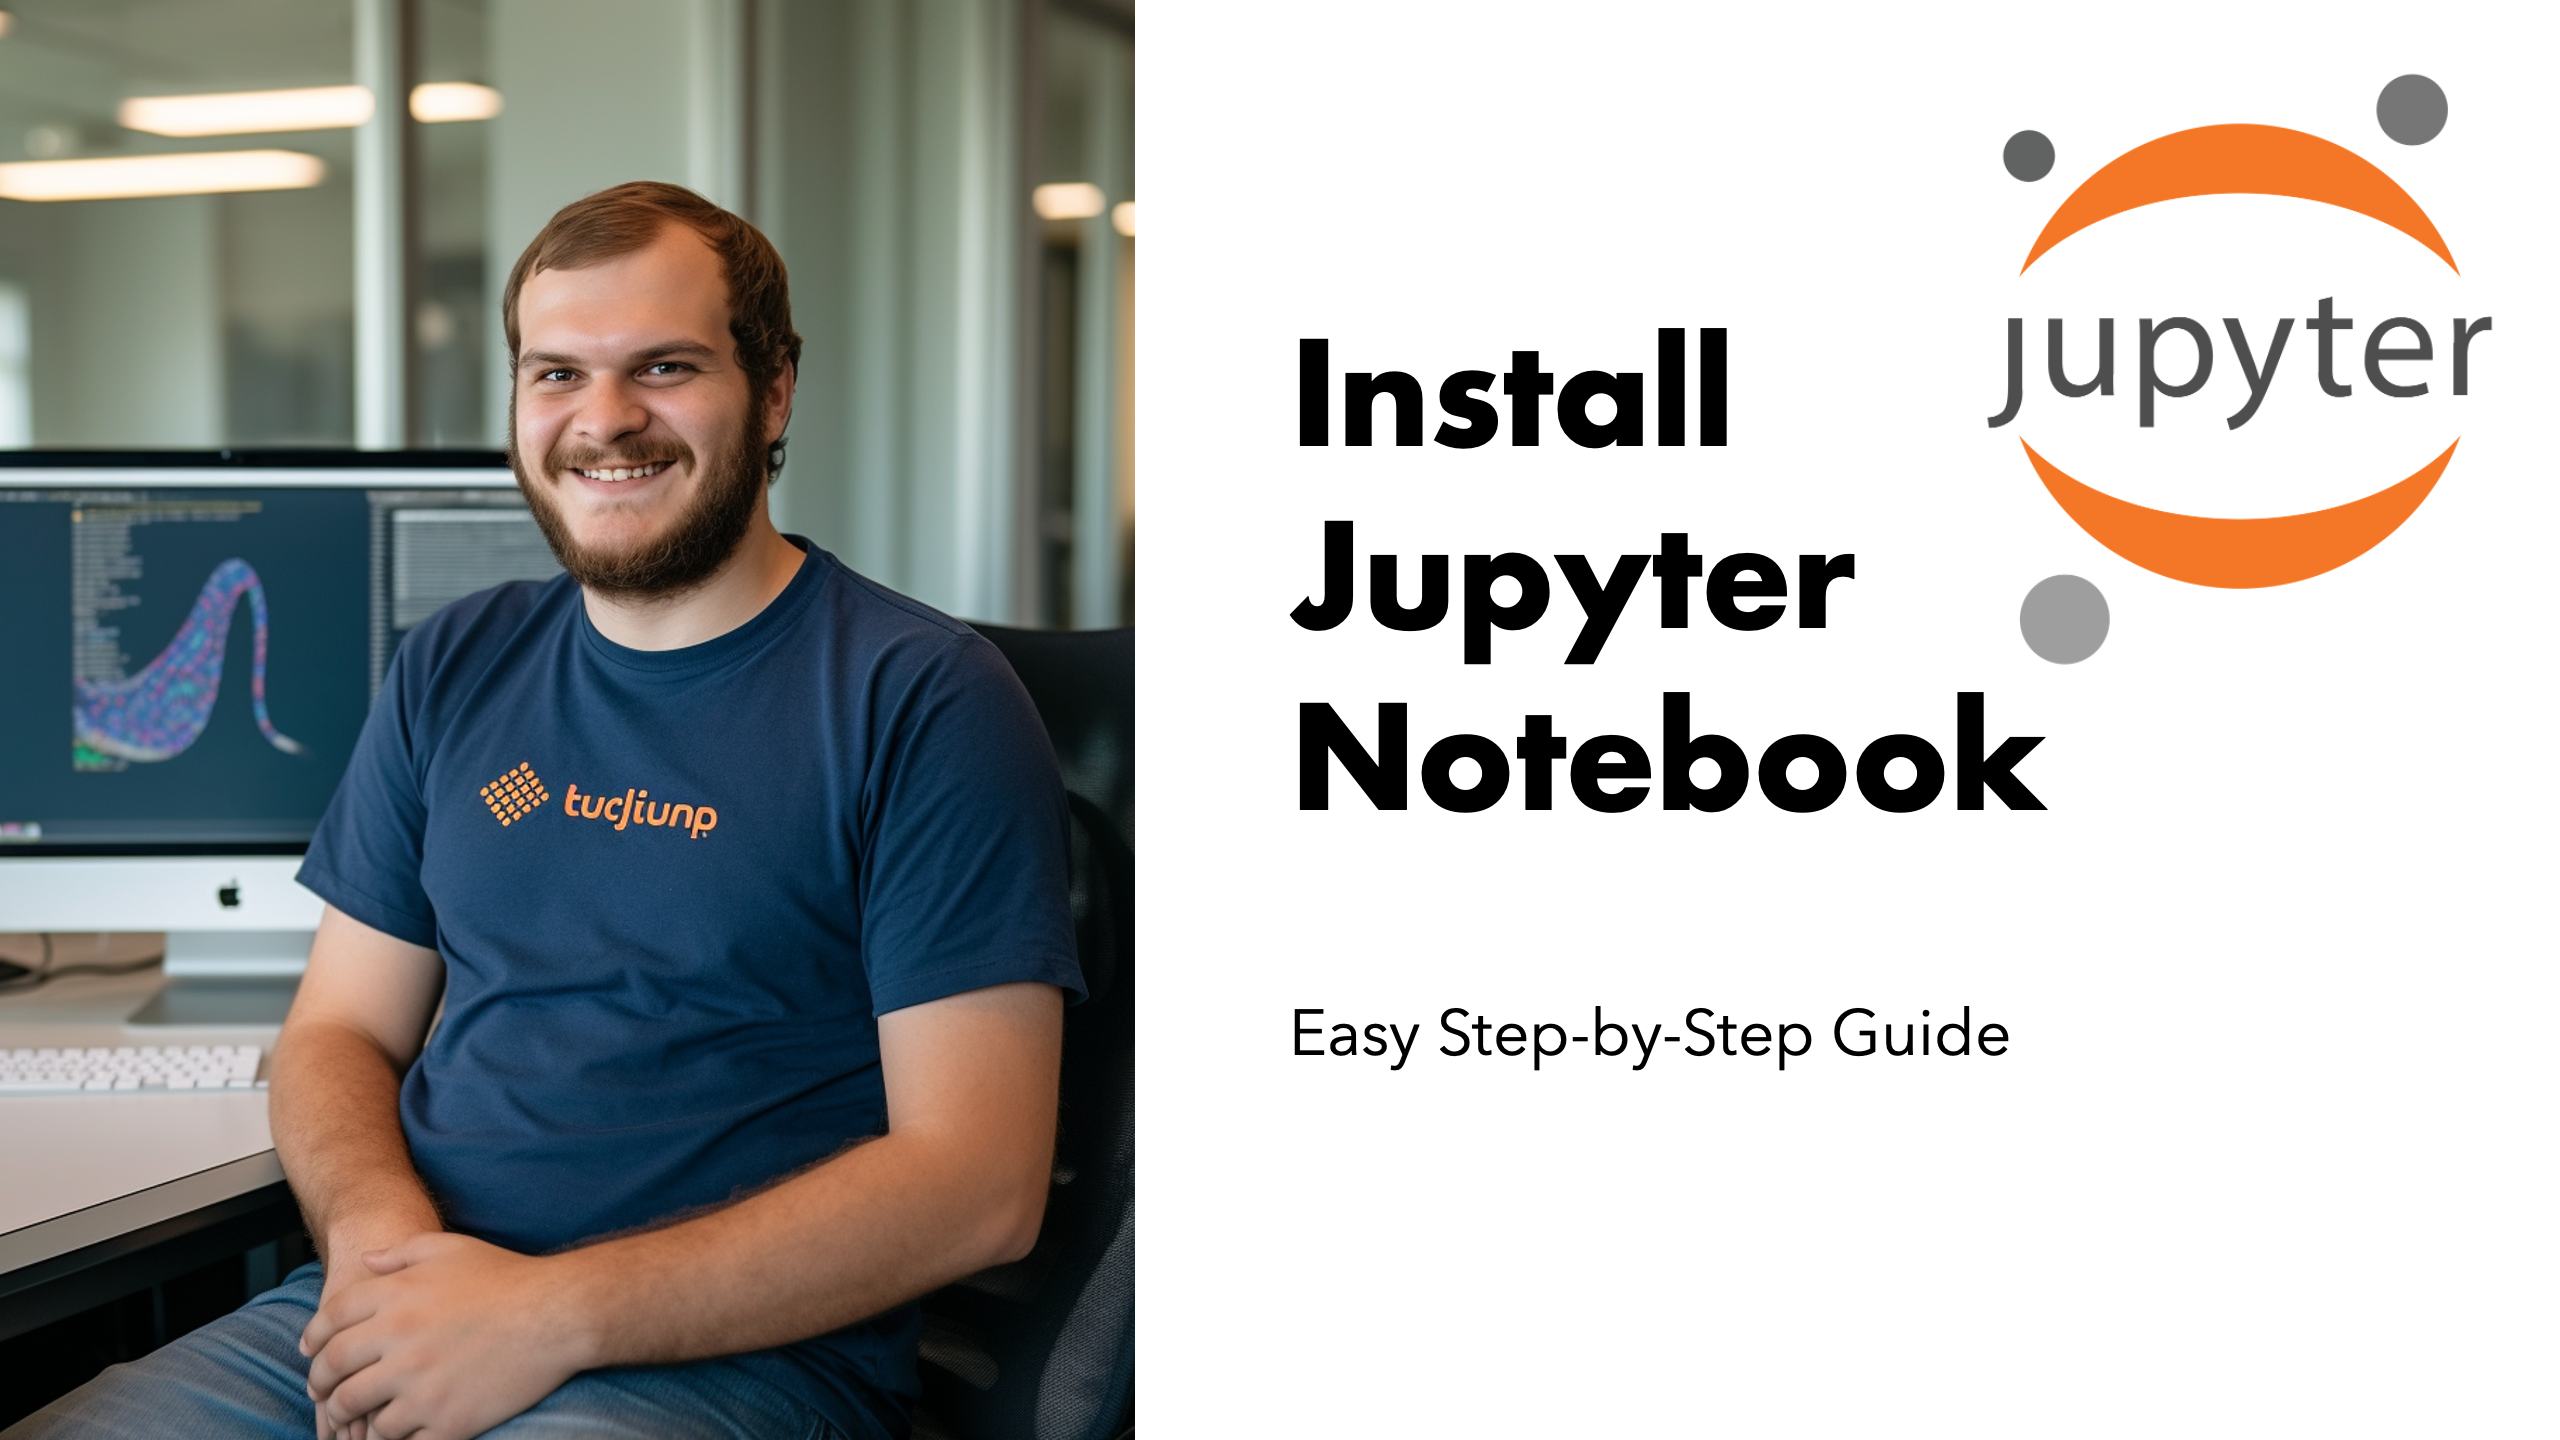 Install Jupyter Notebook - Easy Step-by-Step Guide